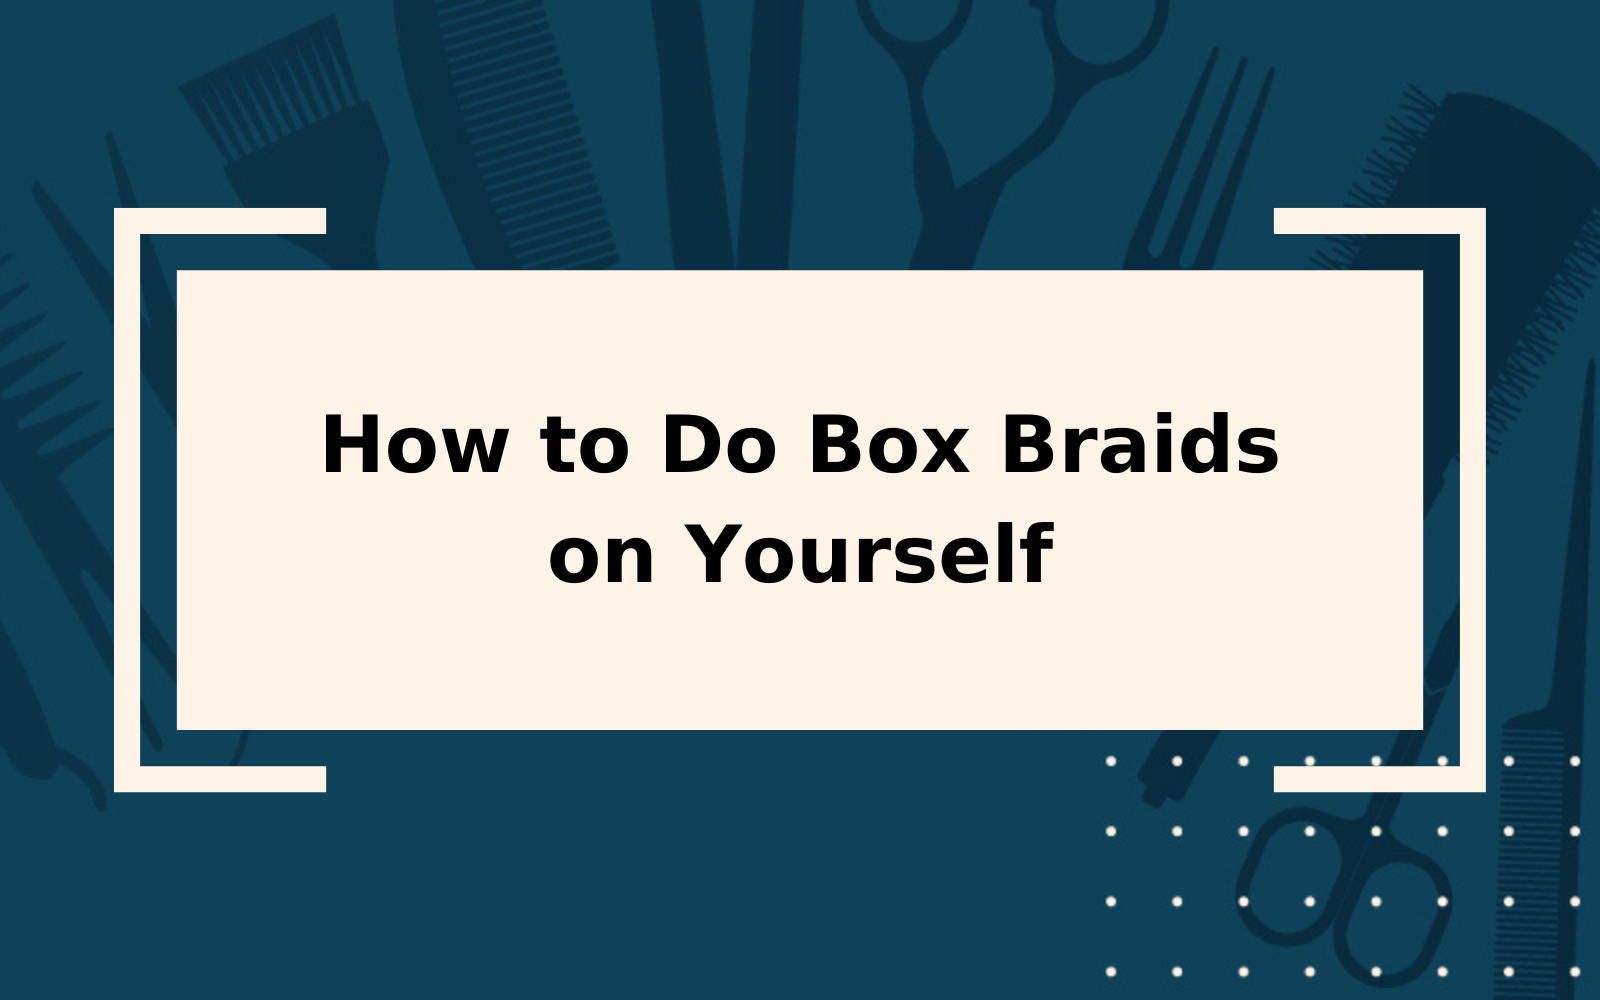 How to Do Box Braids on Yourself | Step-by-Step Guide